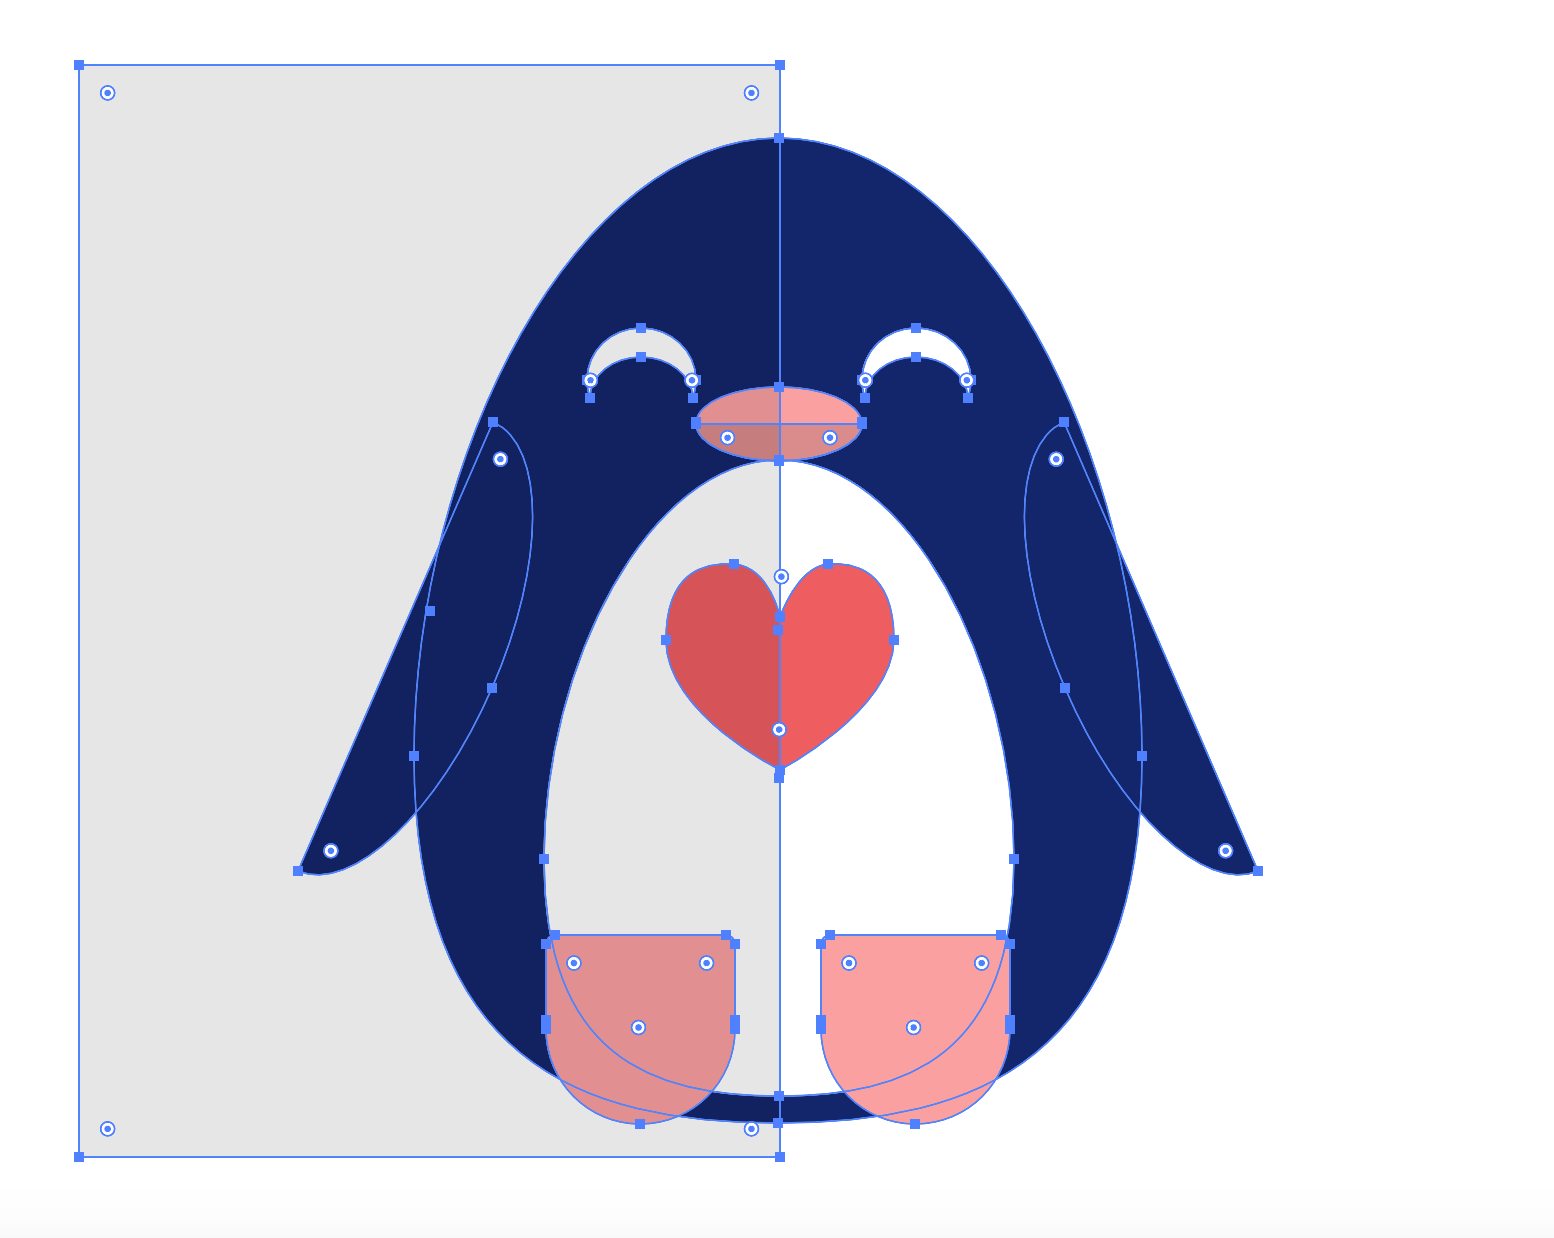 A shadow covers half of the penguin